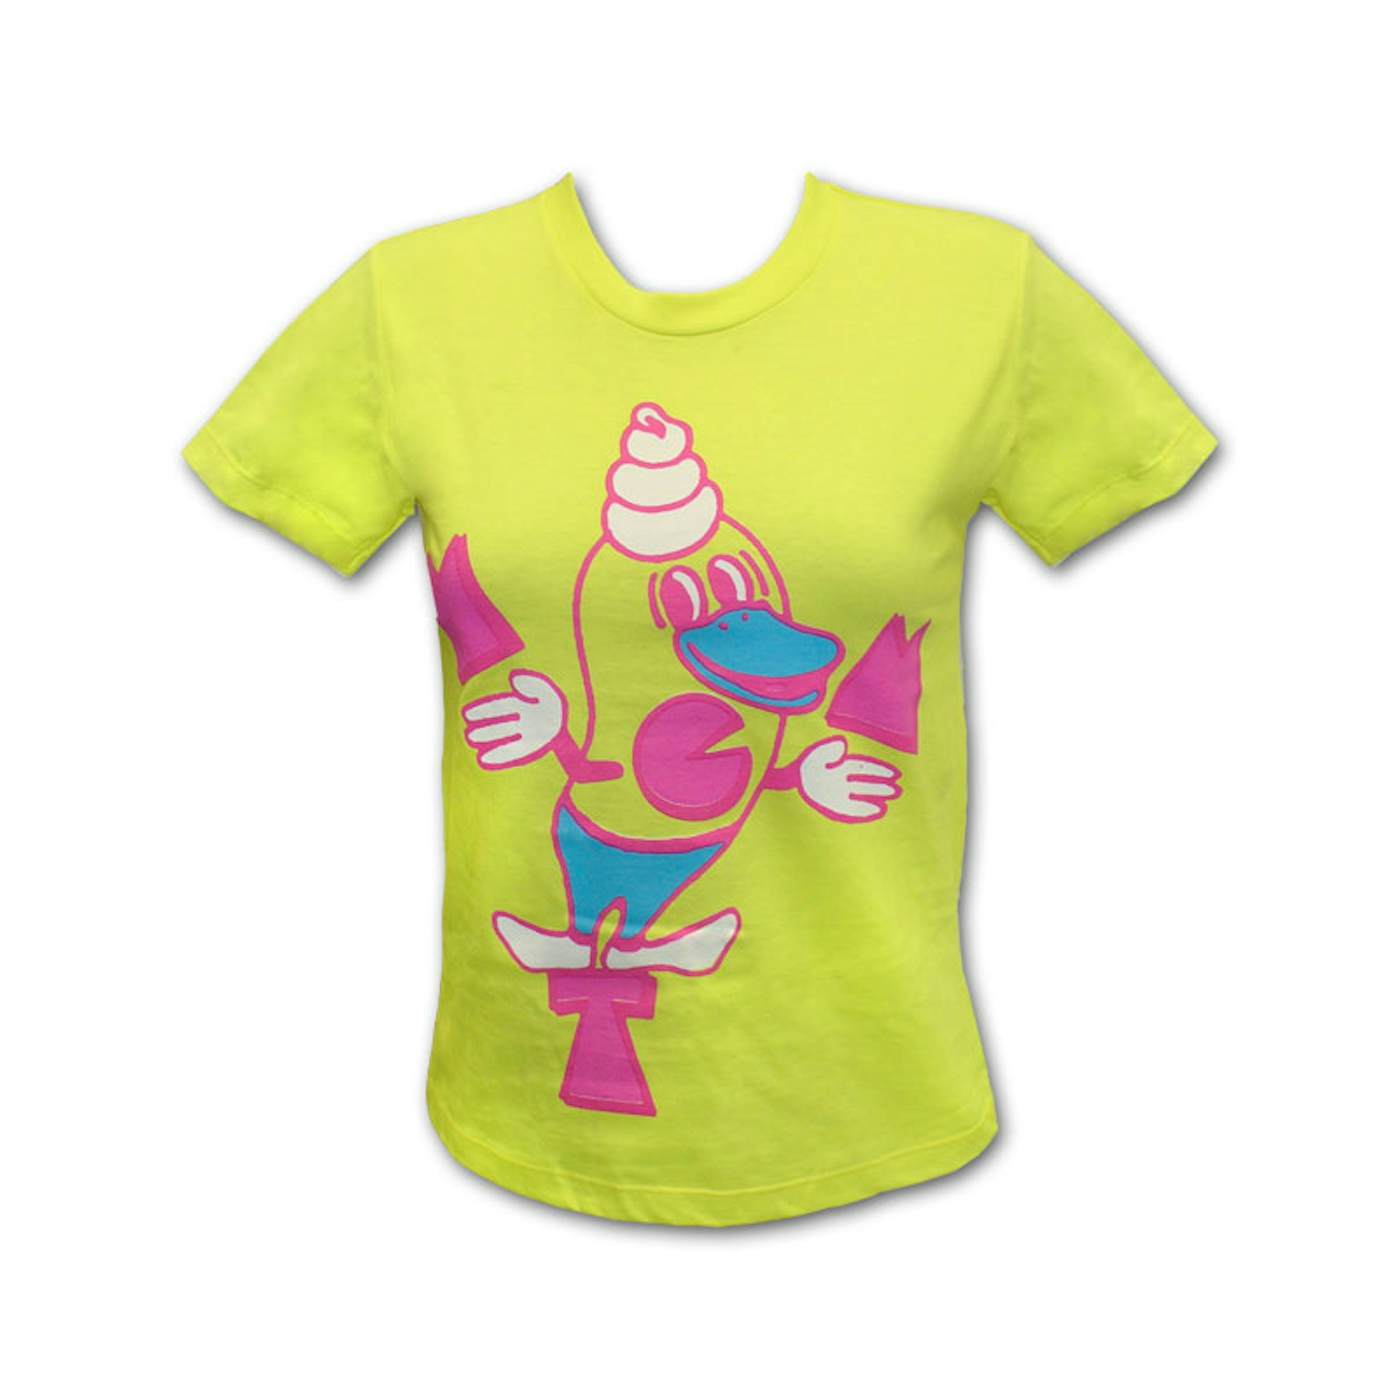 MGMT Girl's Yellow Soft Serve T-shirt